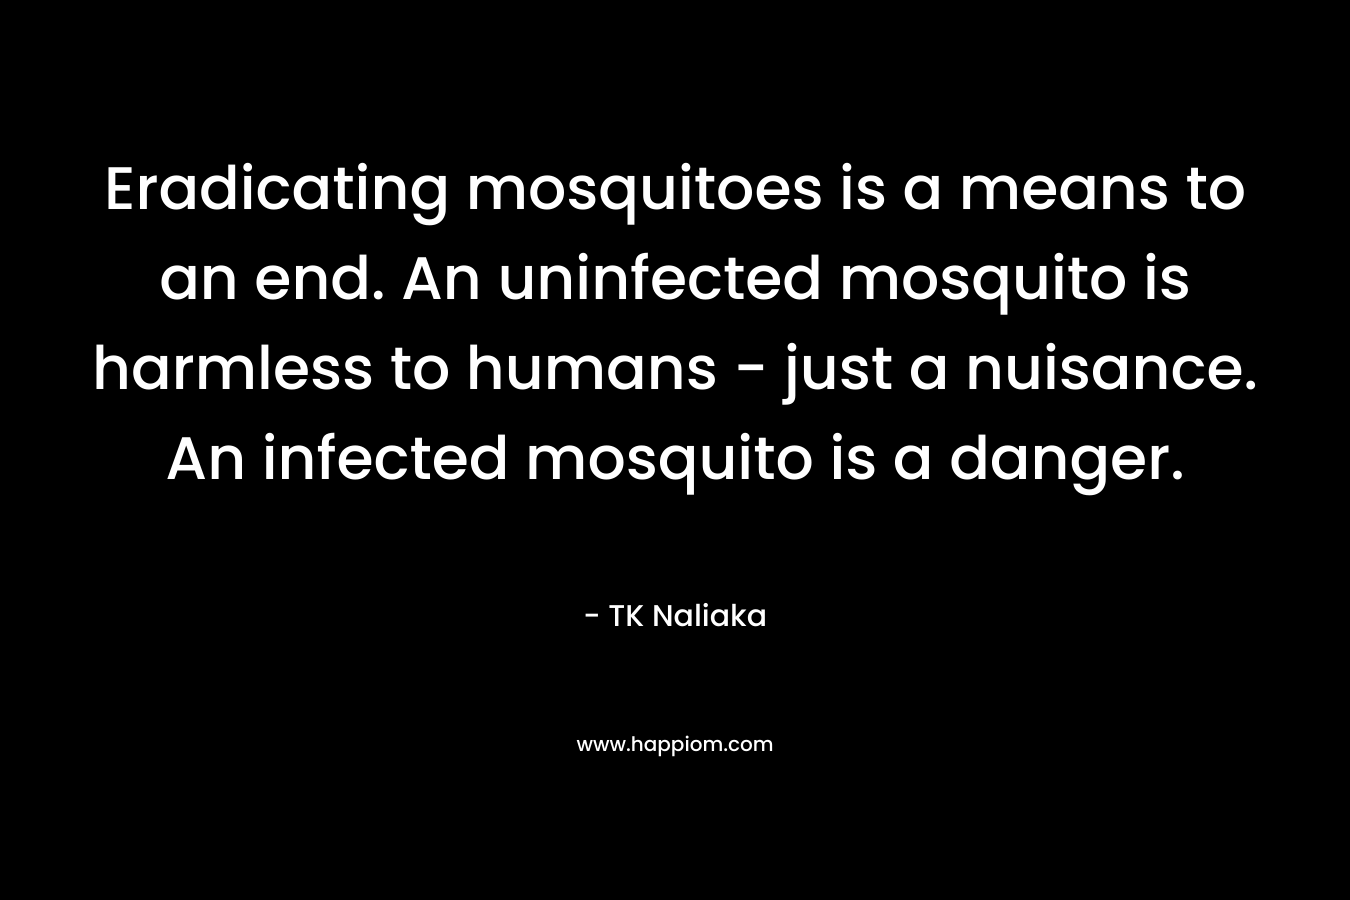 Eradicating mosquitoes is a means to an end. An uninfected mosquito is harmless to humans – just a nuisance. An infected mosquito is a danger. – TK Naliaka